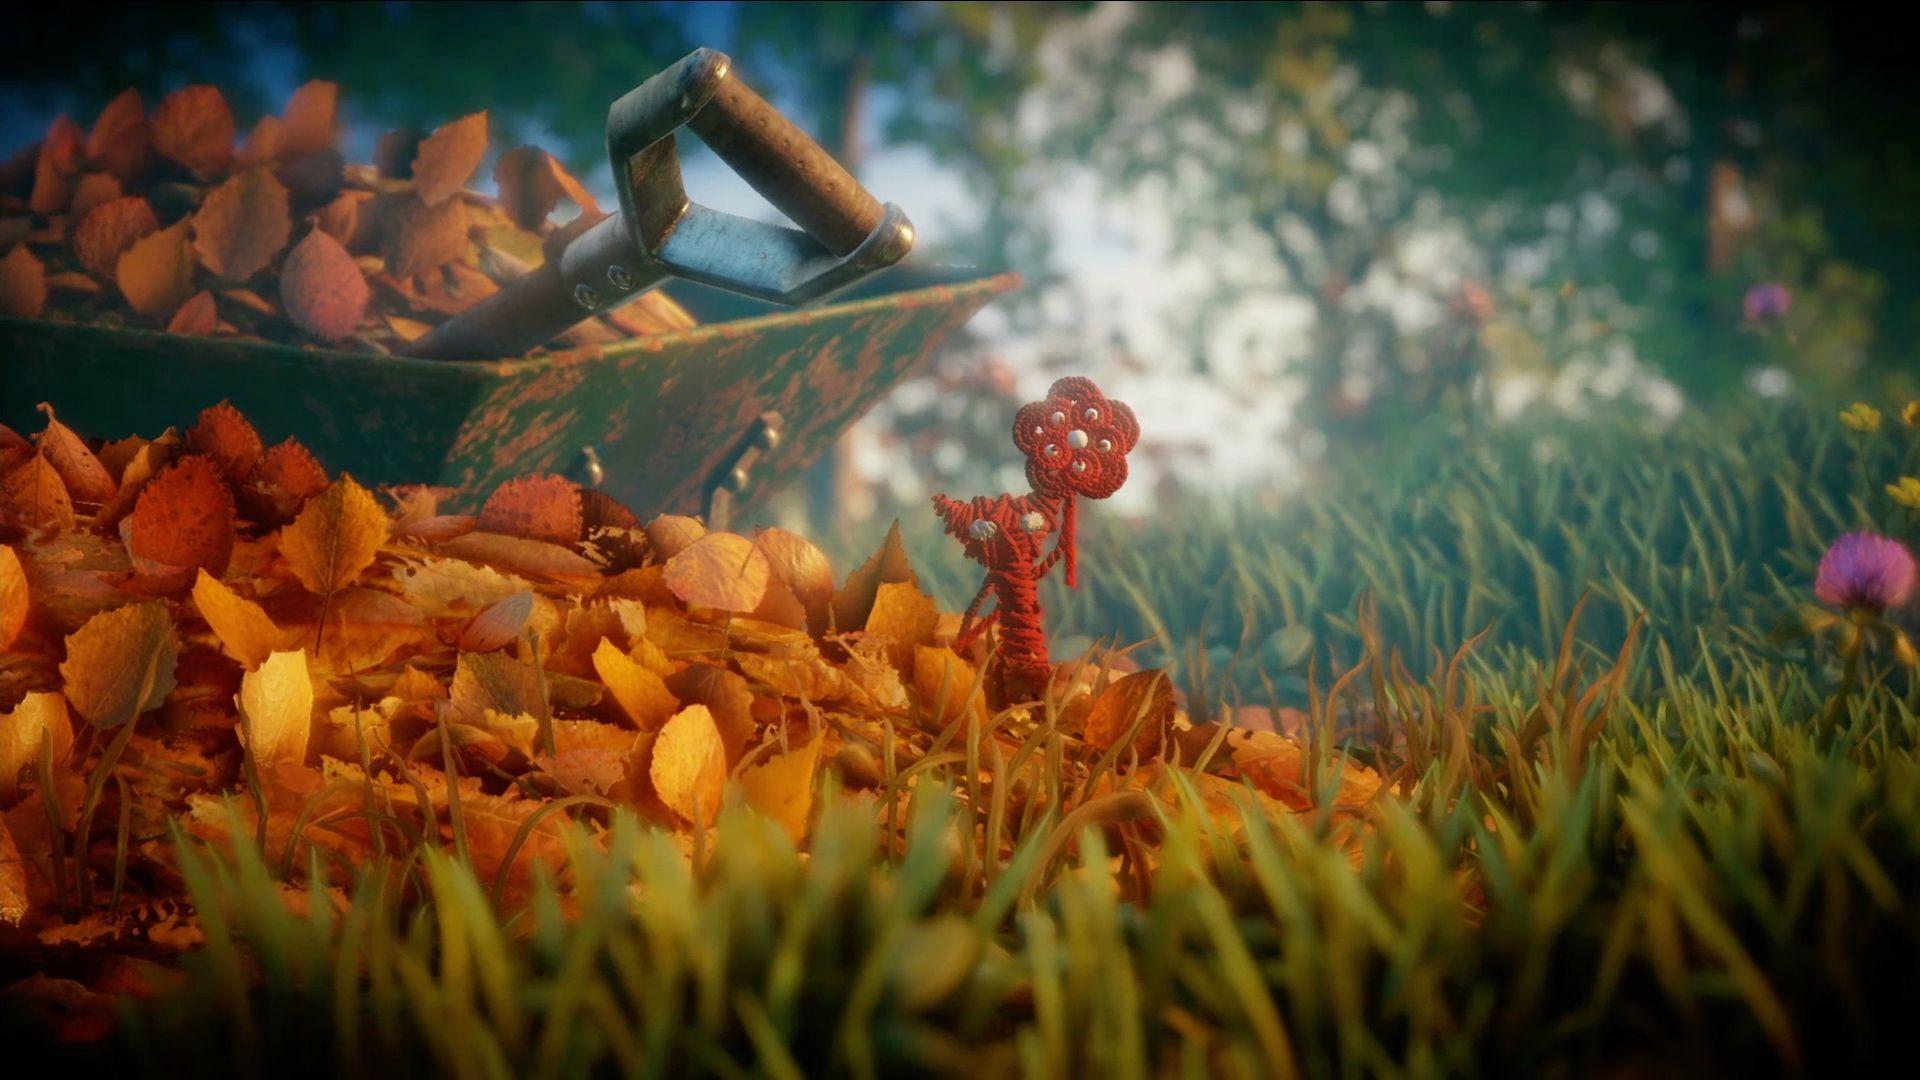 HD Wallpaper, Game Background 1920×1080 Unravel Wallpaper 33